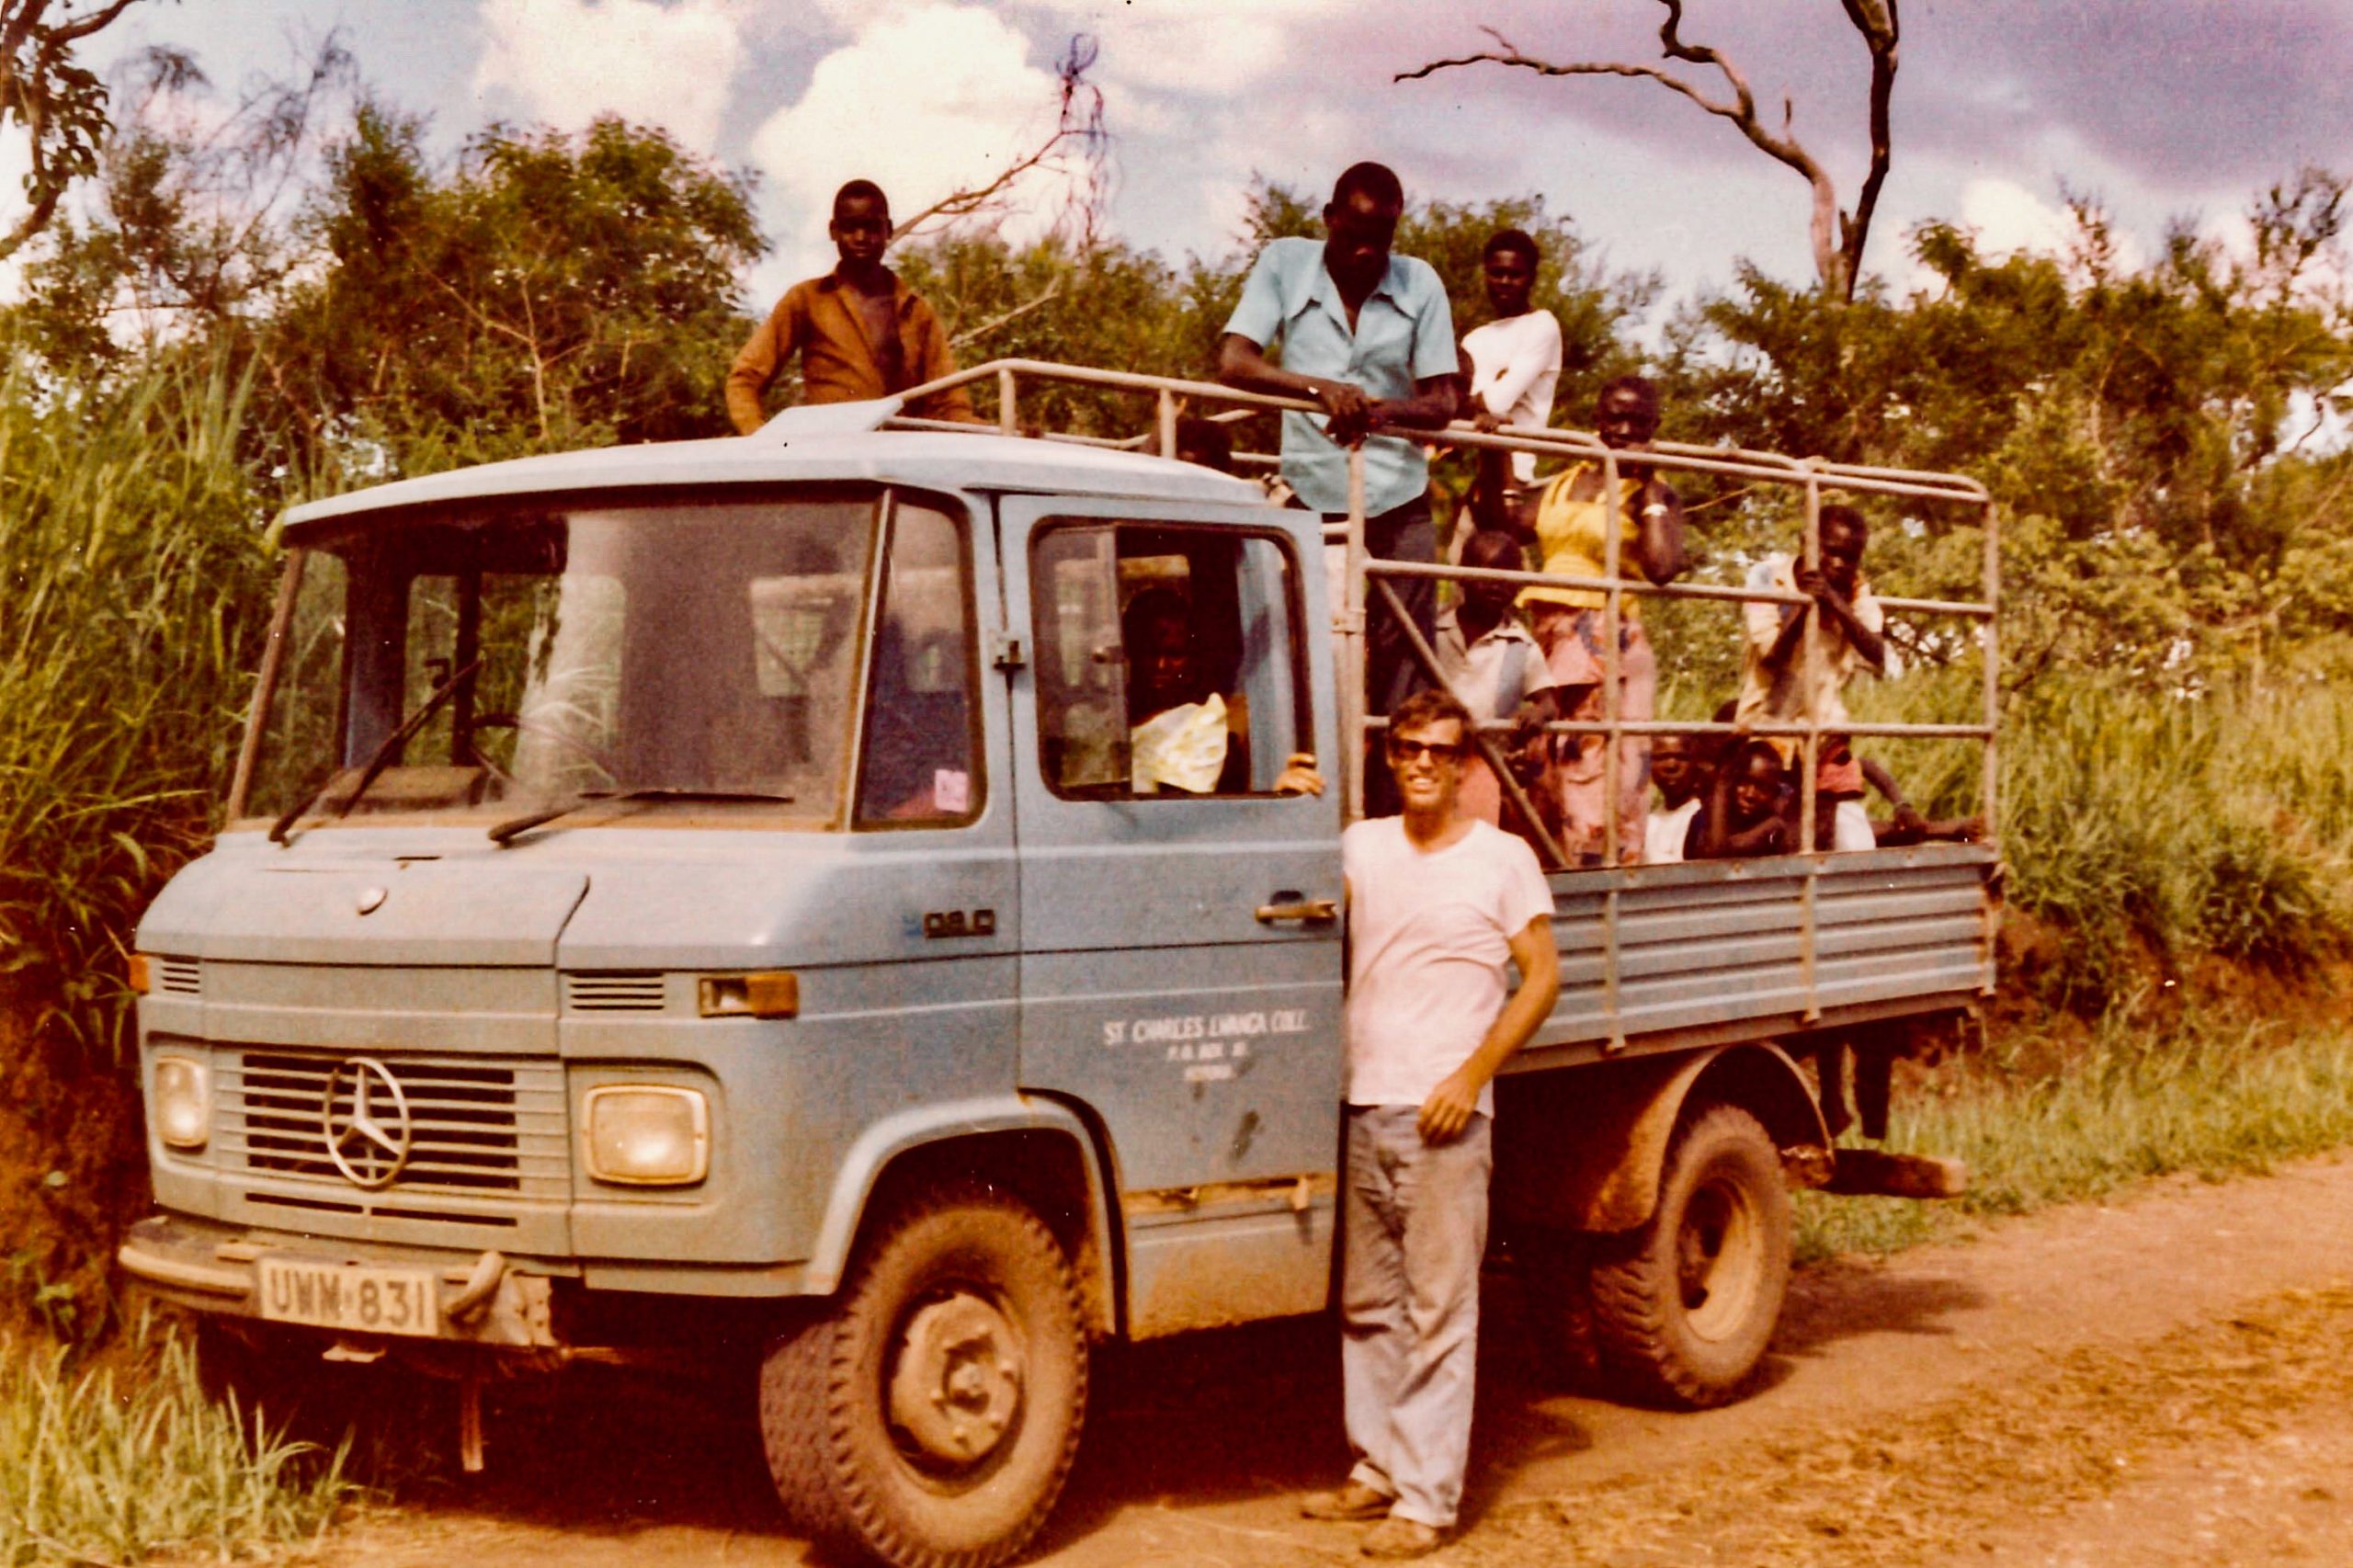 Fr David Baltz stands next to a mercedes lorry in a photo from the 1970s the lorry is open air in the back and several Africans are riding. the side of the lorry says St Charles Lwanga